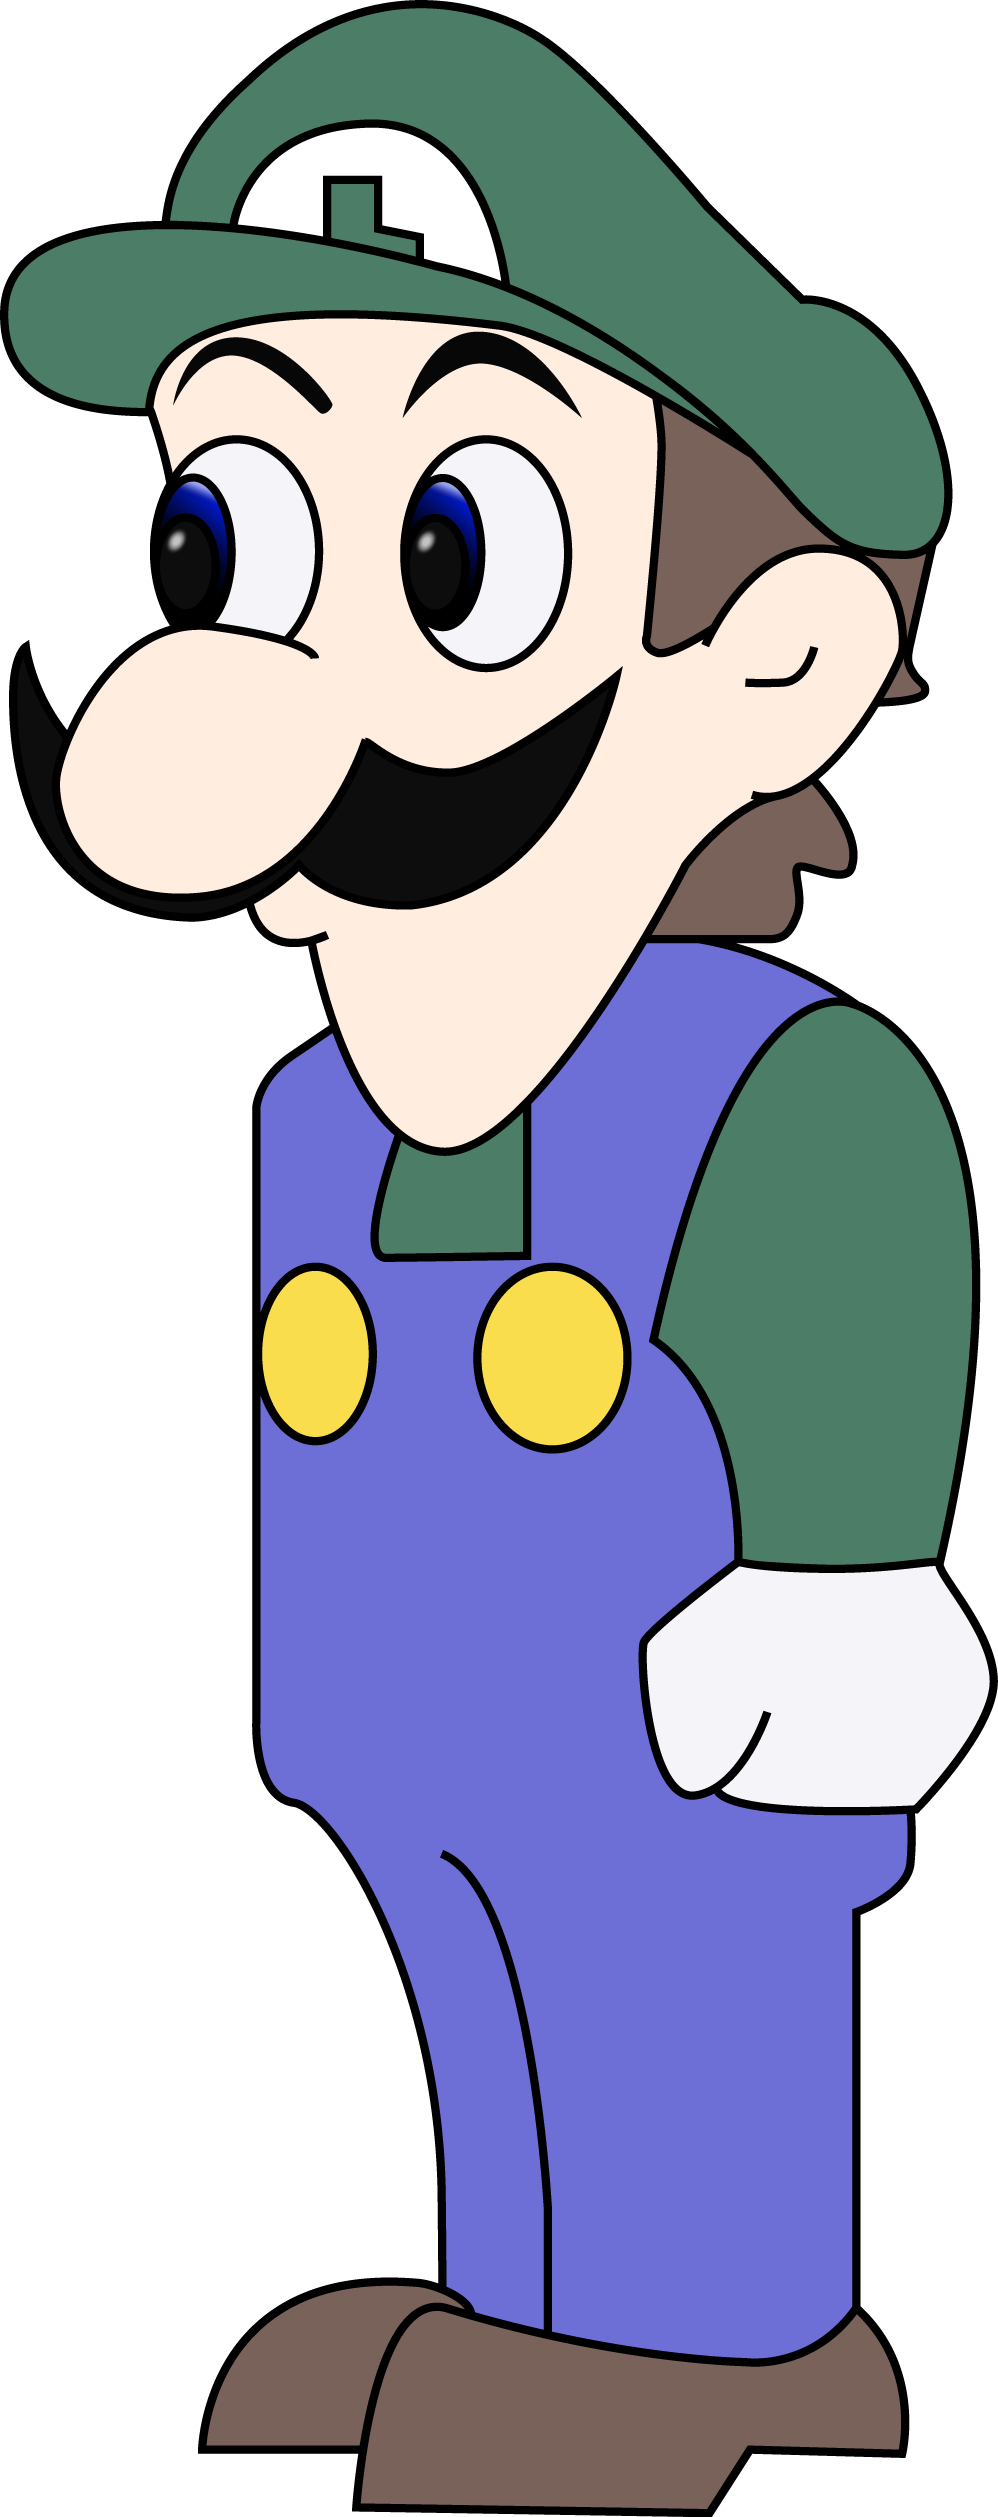 weegee_hd_by_magic_monkey761-d5hpt1a.png